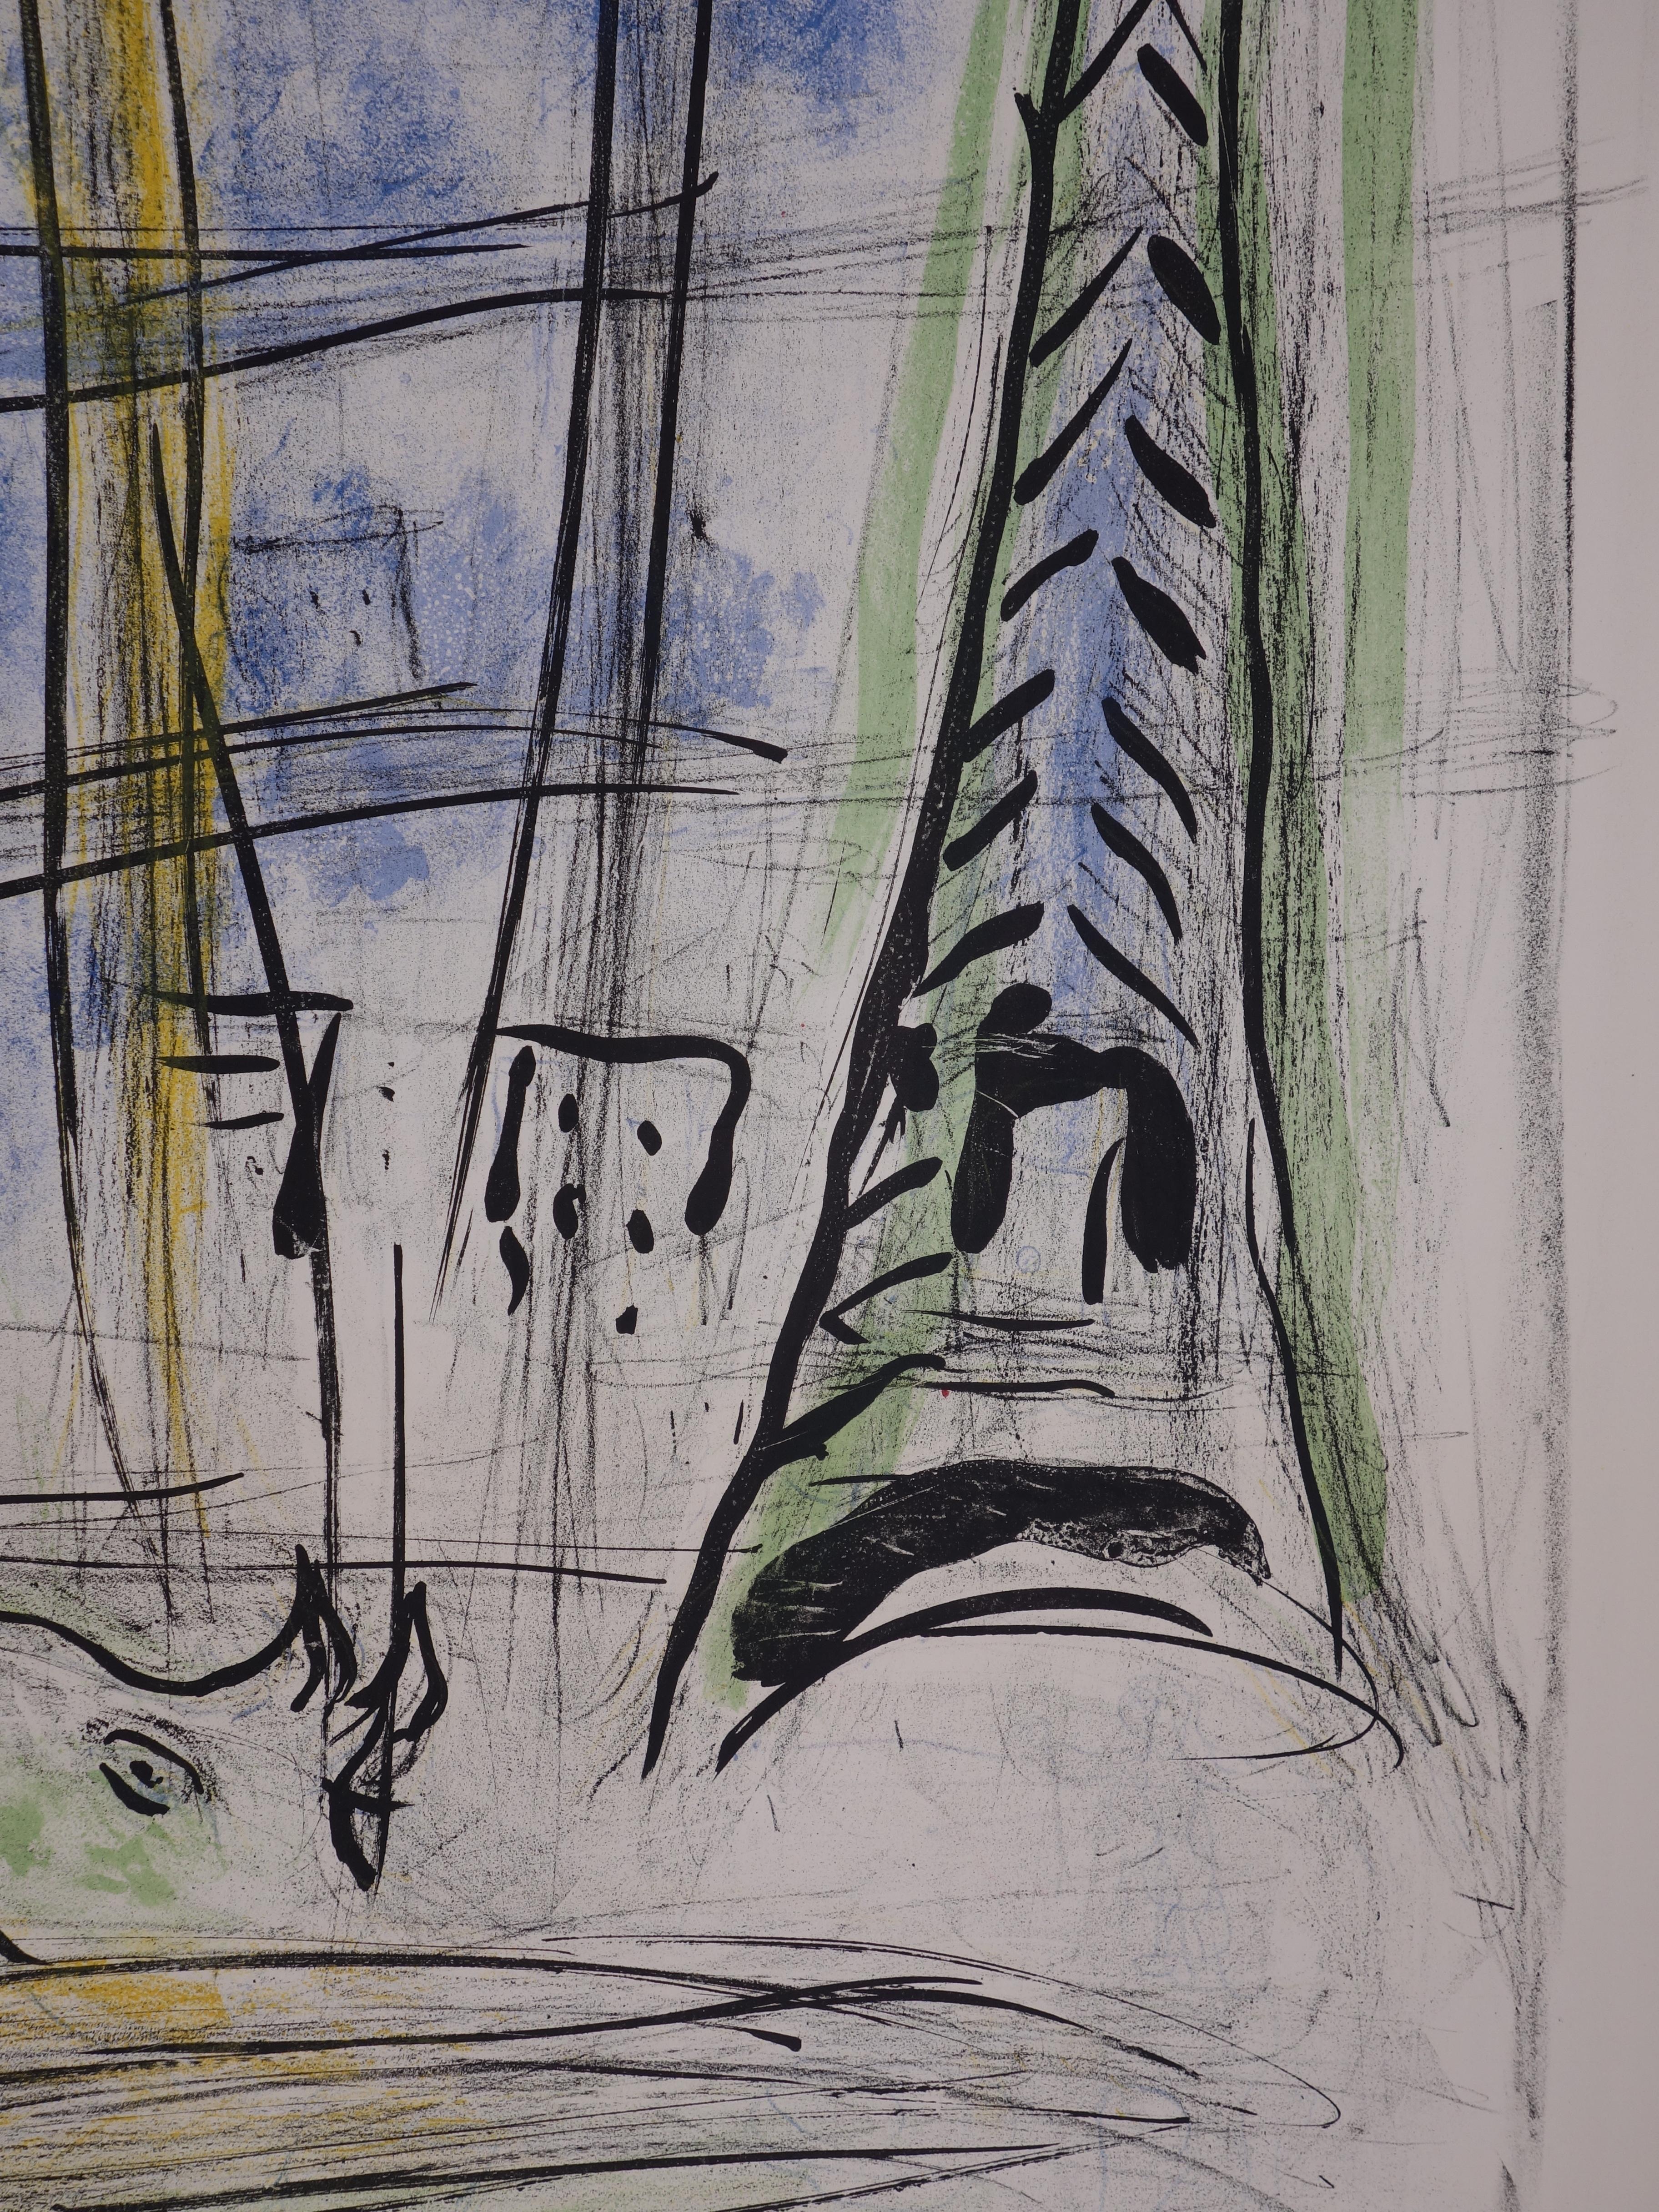 Paris : Room with View on the Eiffel Tower - Original lithograph # 160 cm tall - Print by Marc Chagall